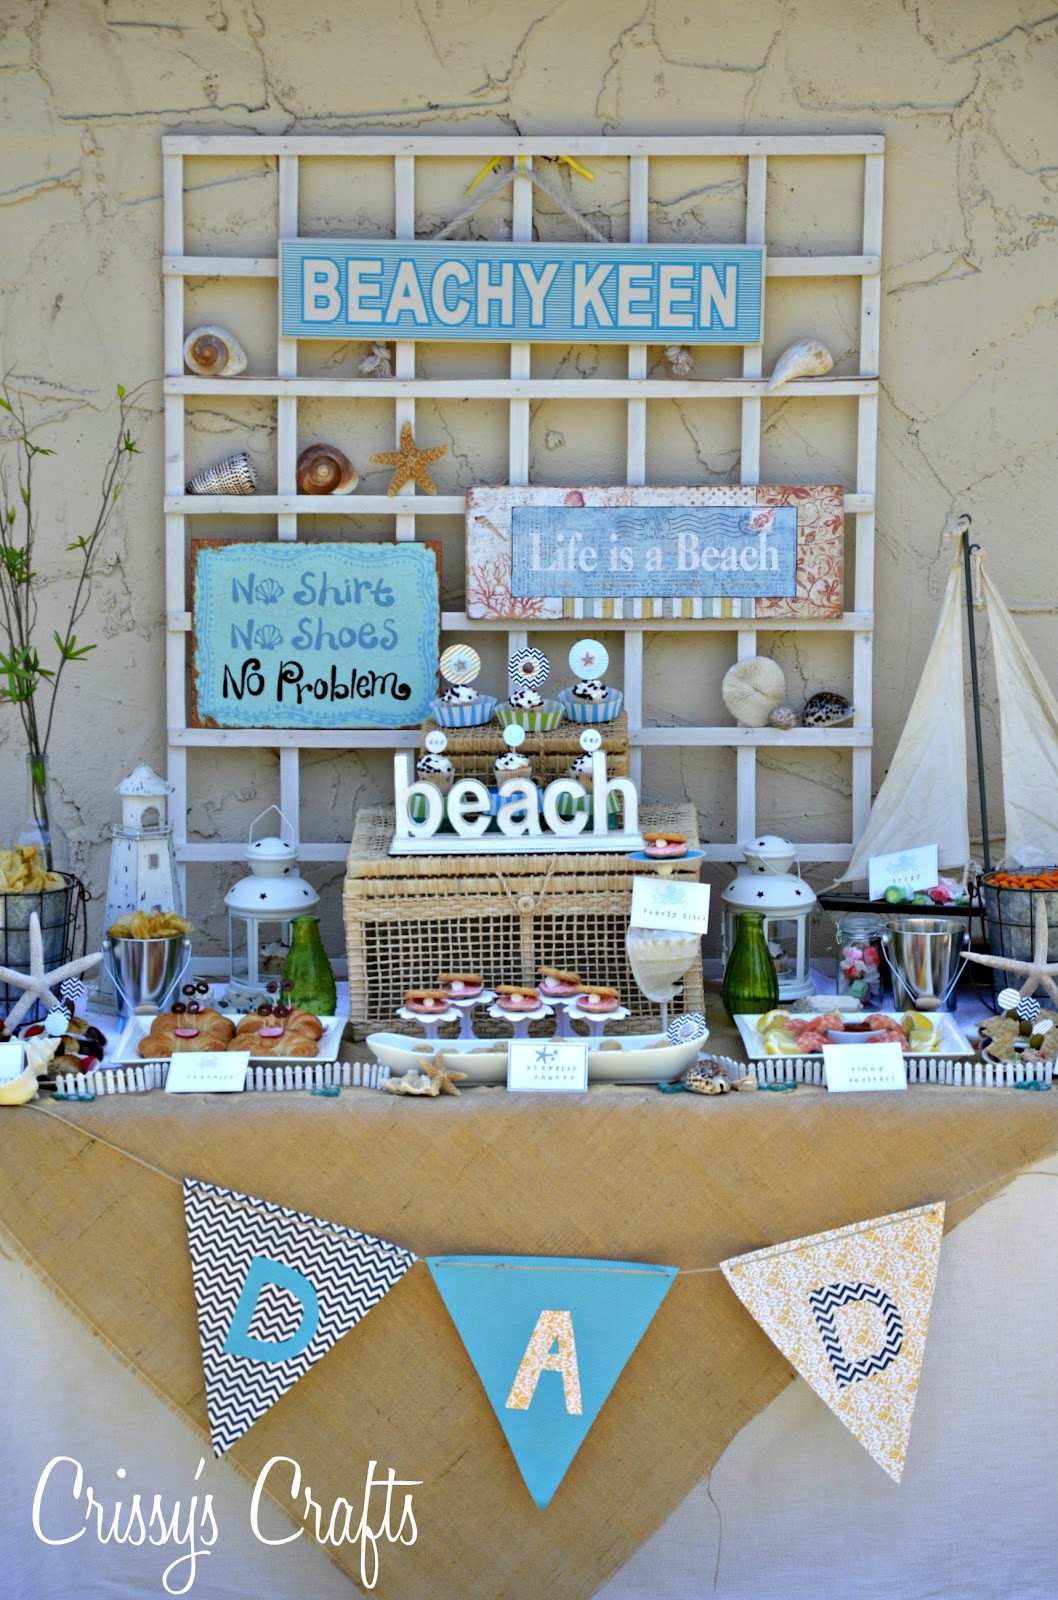 Graduation Favor Ideas For A Beach Party
 Crissy s Crafts Beachy Kneen Party